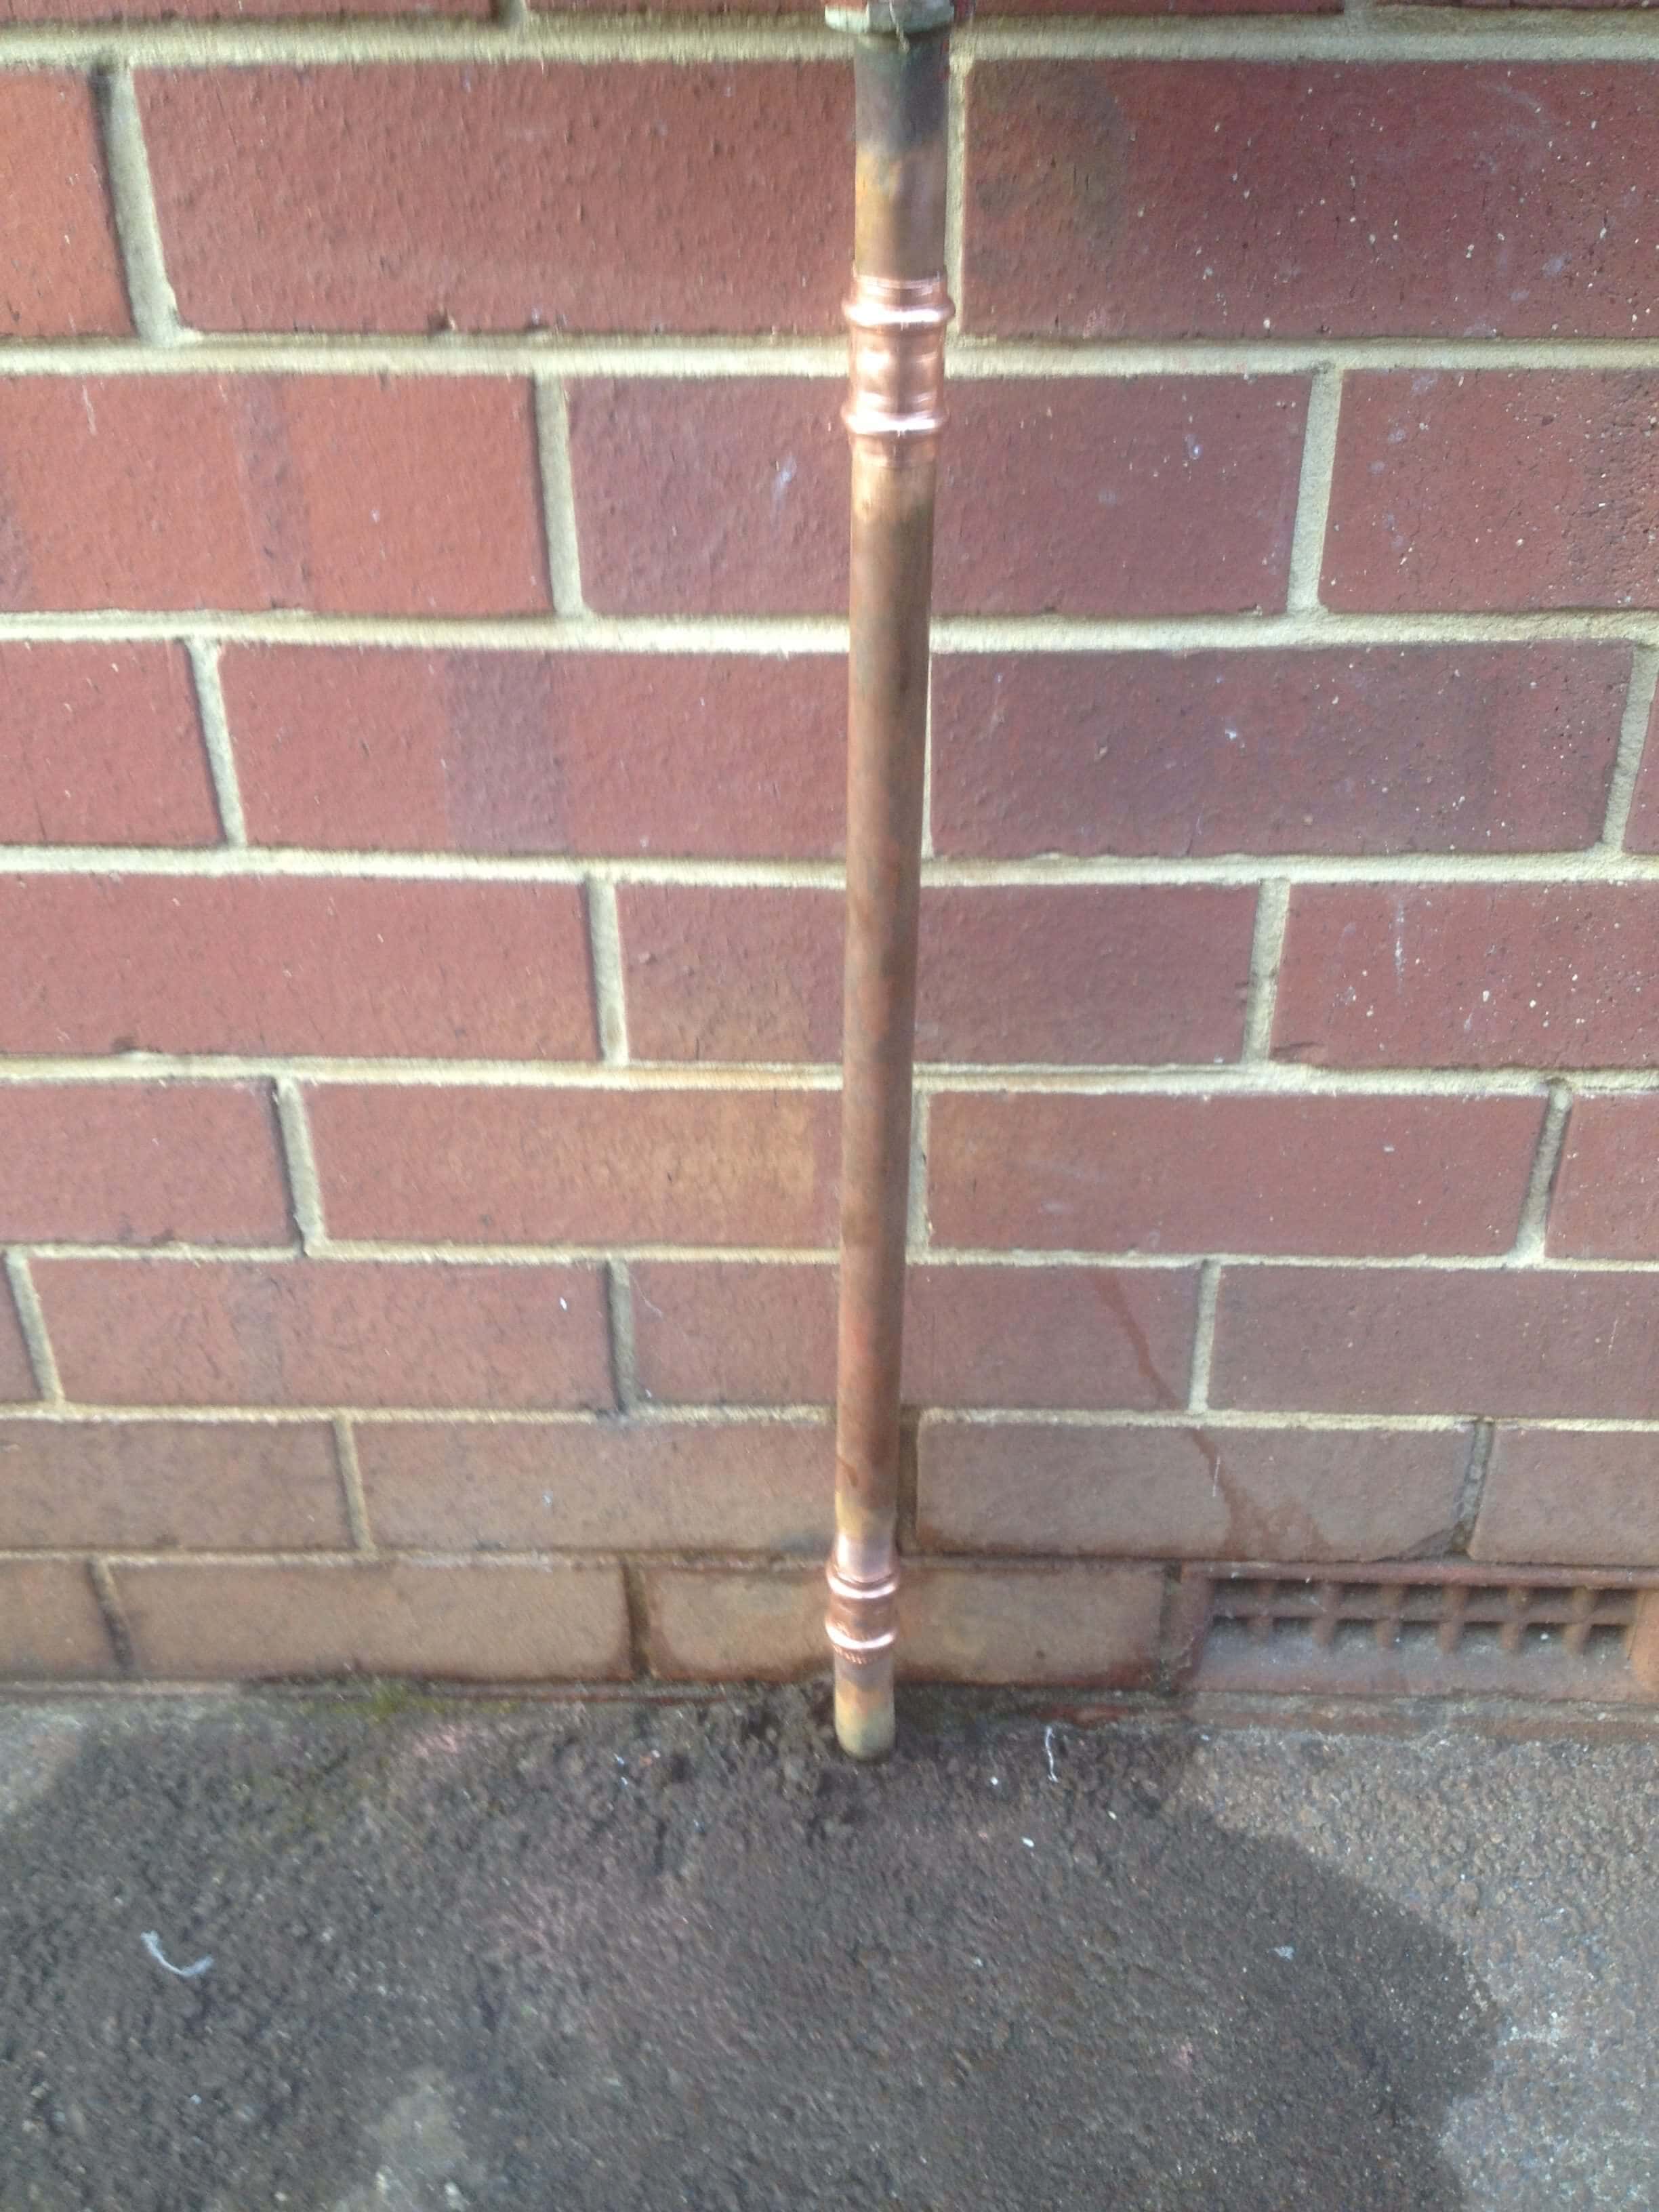 Everyday Plumbers Residential Hotwater Services - Repaired Copper Piping Outside